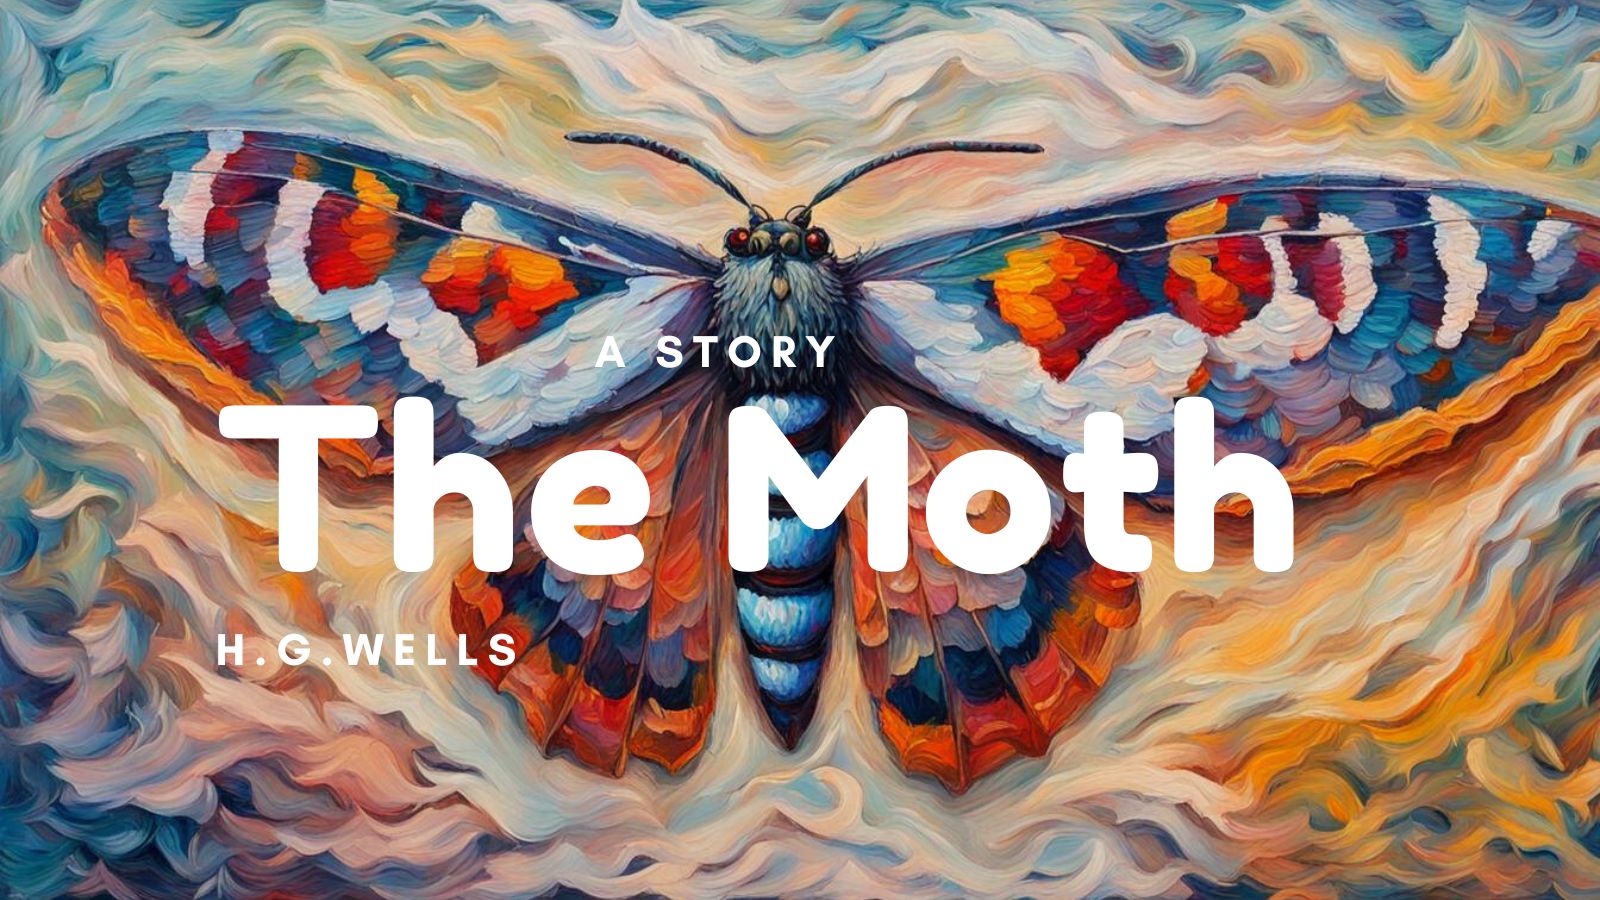 The Moth by H. G. Wells